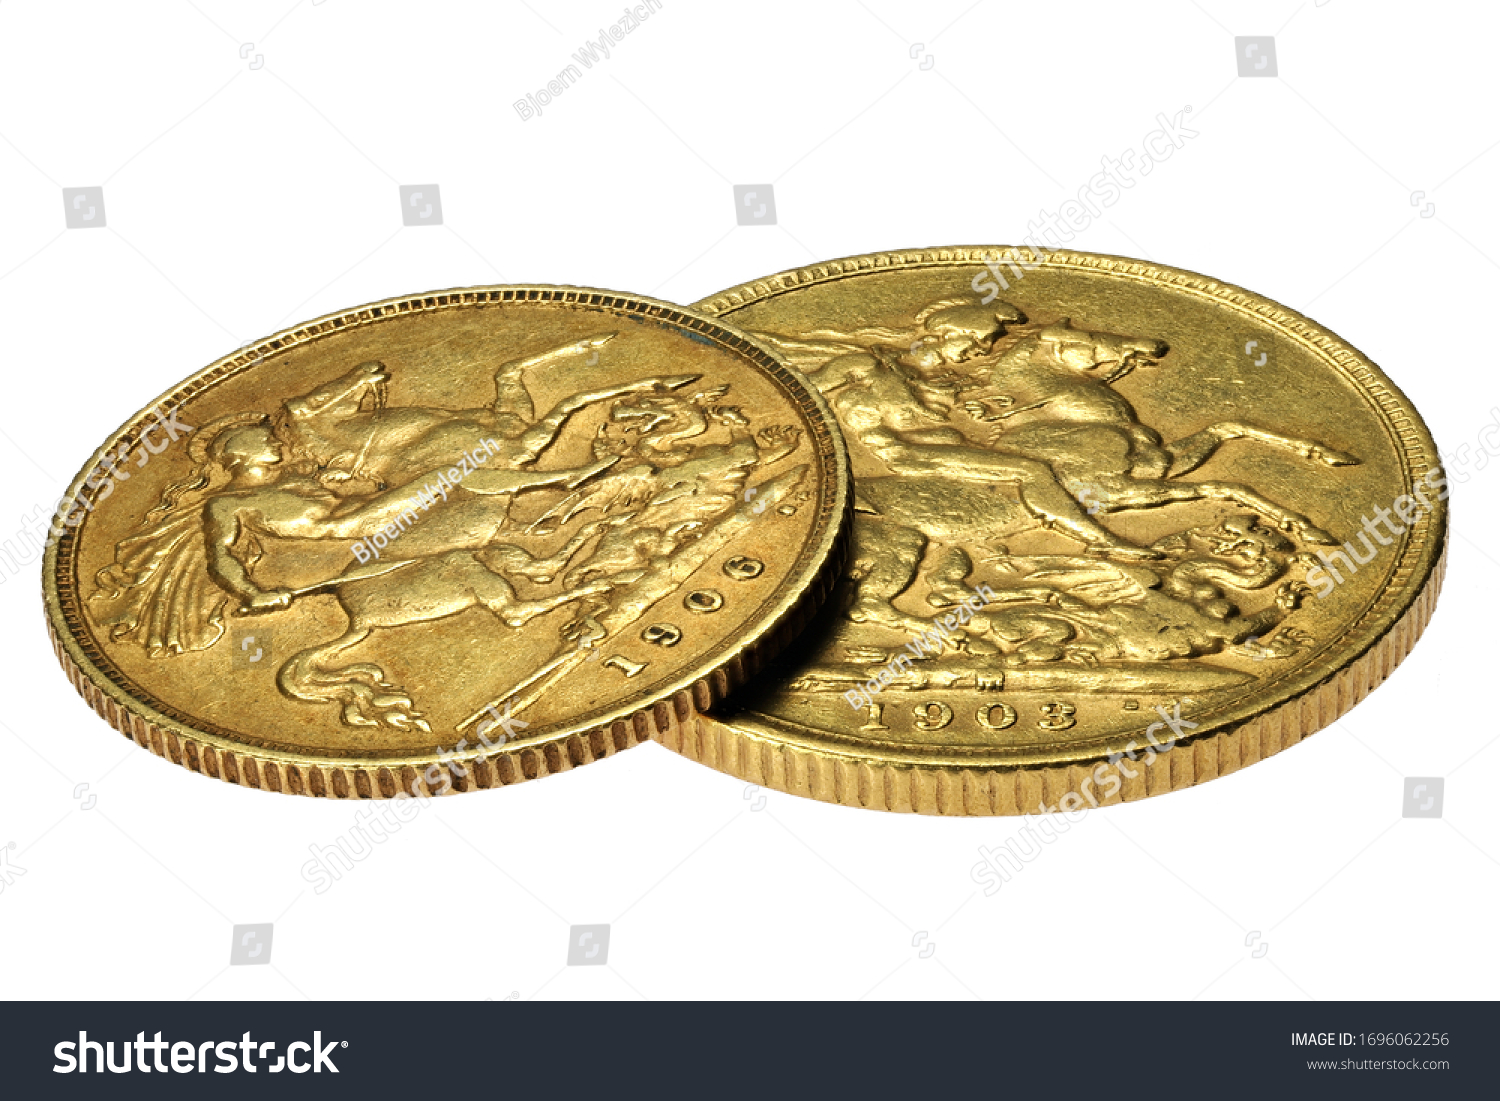 British full and half Sovereign gold coins isolated on white background #1696062256